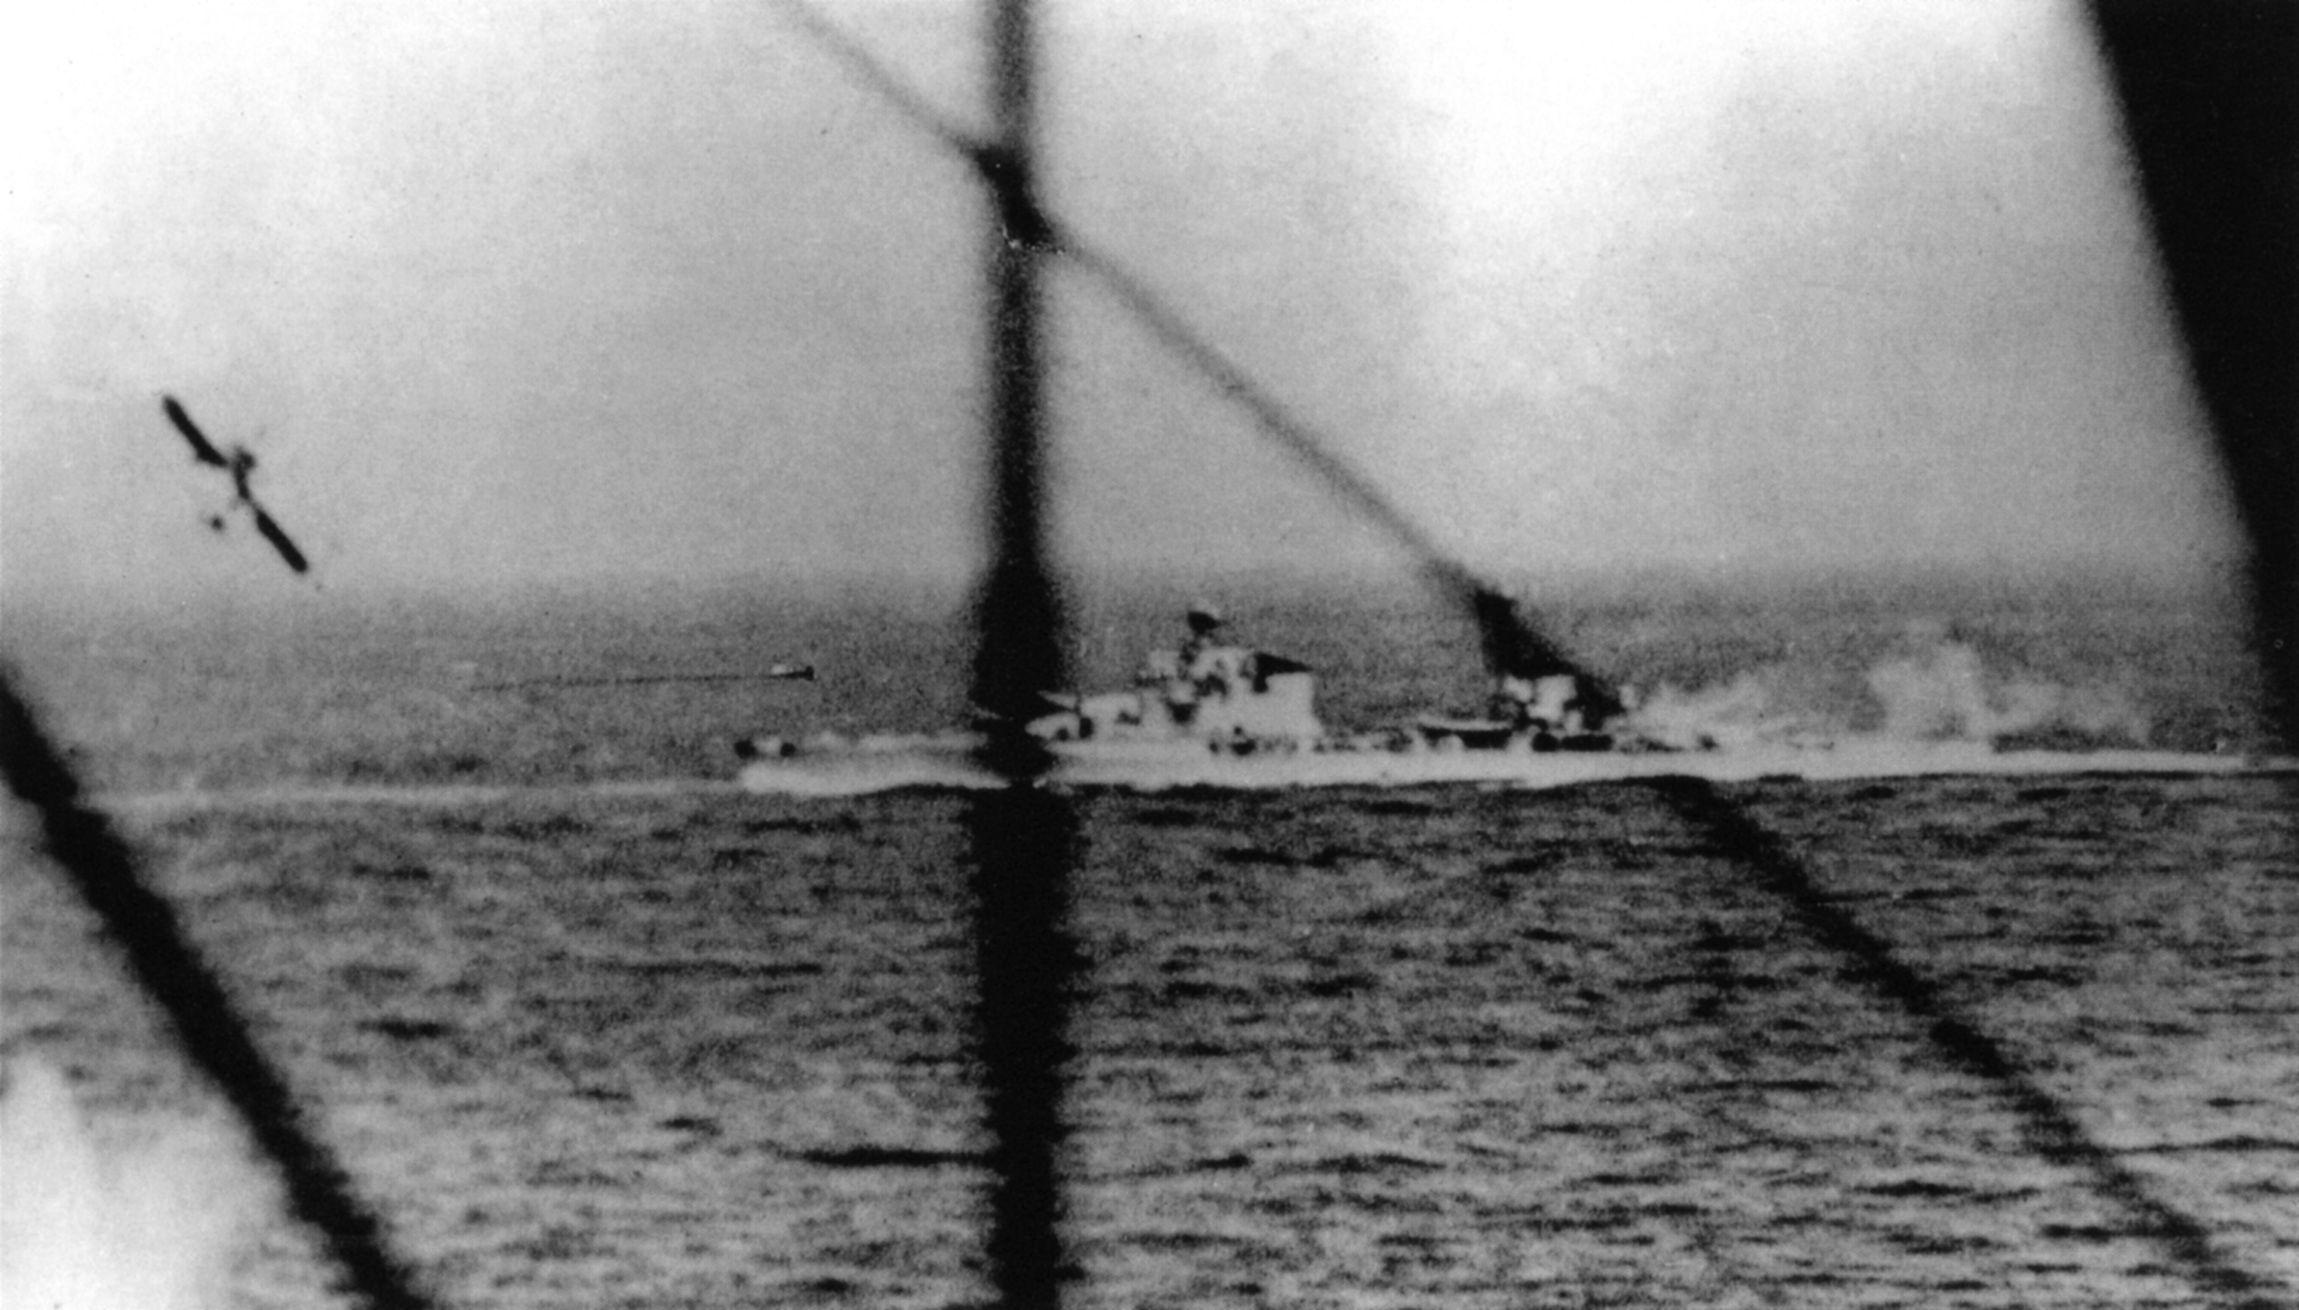 A British Fairey Albacore torpedo bomber pulls up after releasing its weapon toward the Italian heavy cruiser Pola. This photograph was taken from a Fairey Swordfish, another type of Royal Navy torpedo plane. 